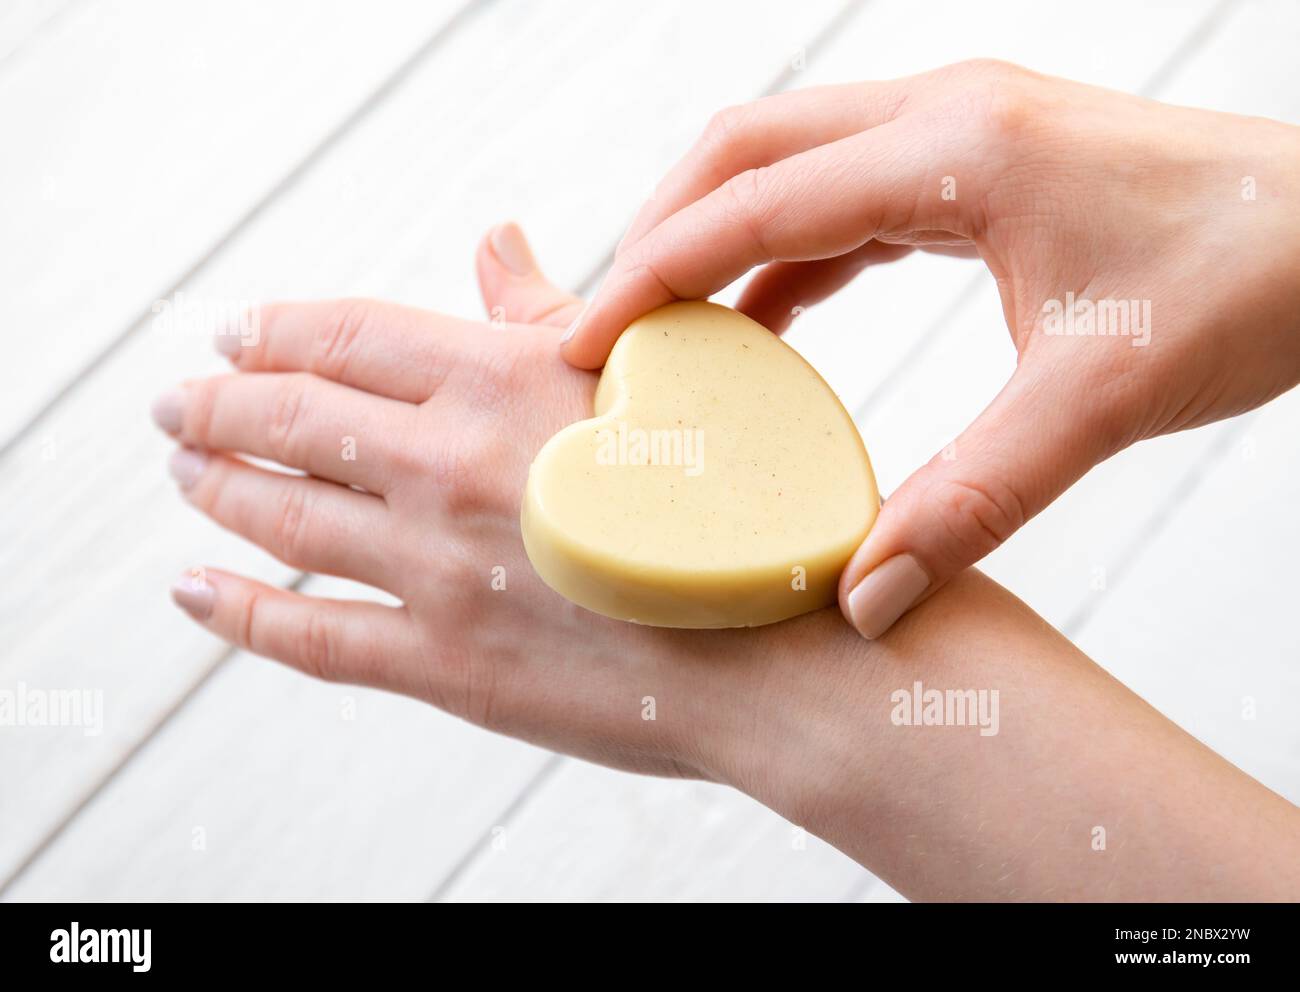 Woman hands holding and applying handmade beeswax and shea butter solid moisturizing hand cream. Handmade with all natural ingredients. Stock Photo